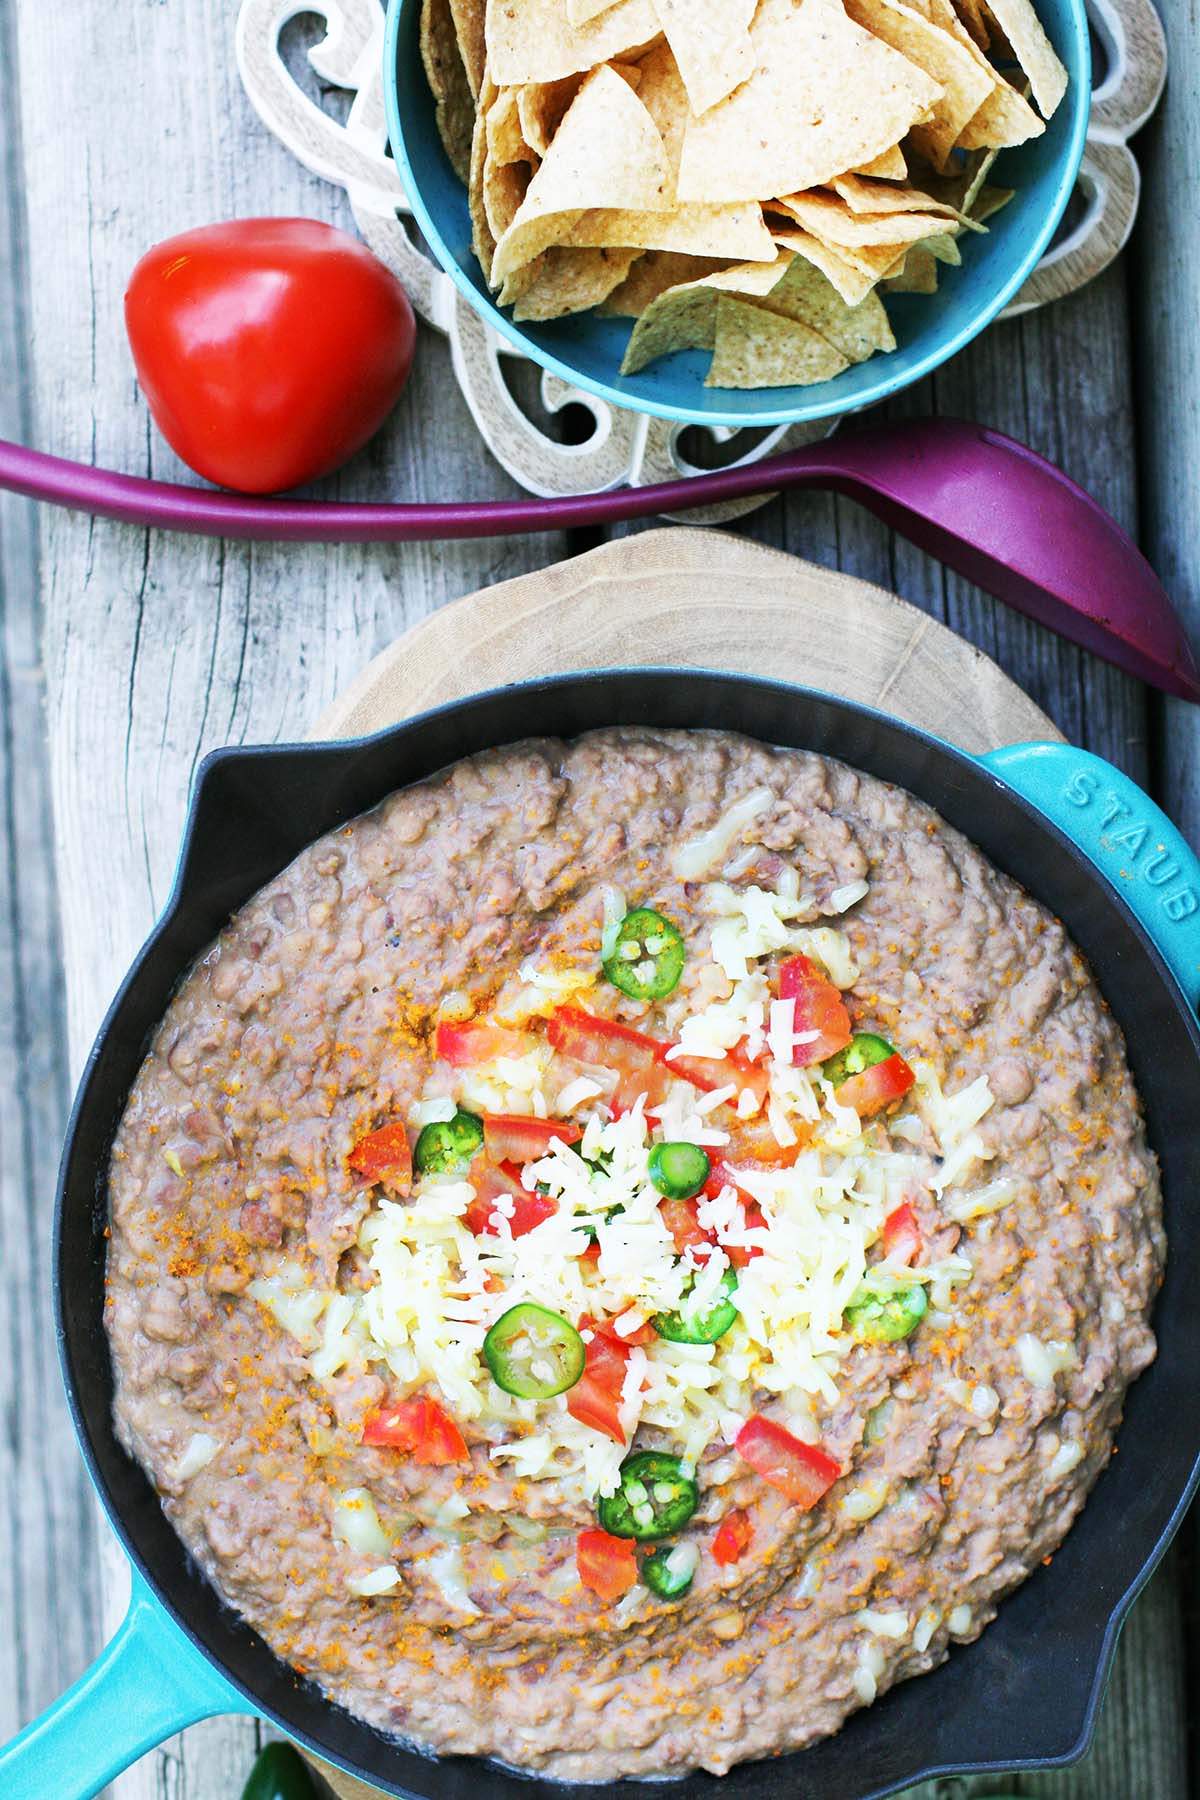 Learn how to make homemade refried beans from scratch. Click through for recipe!